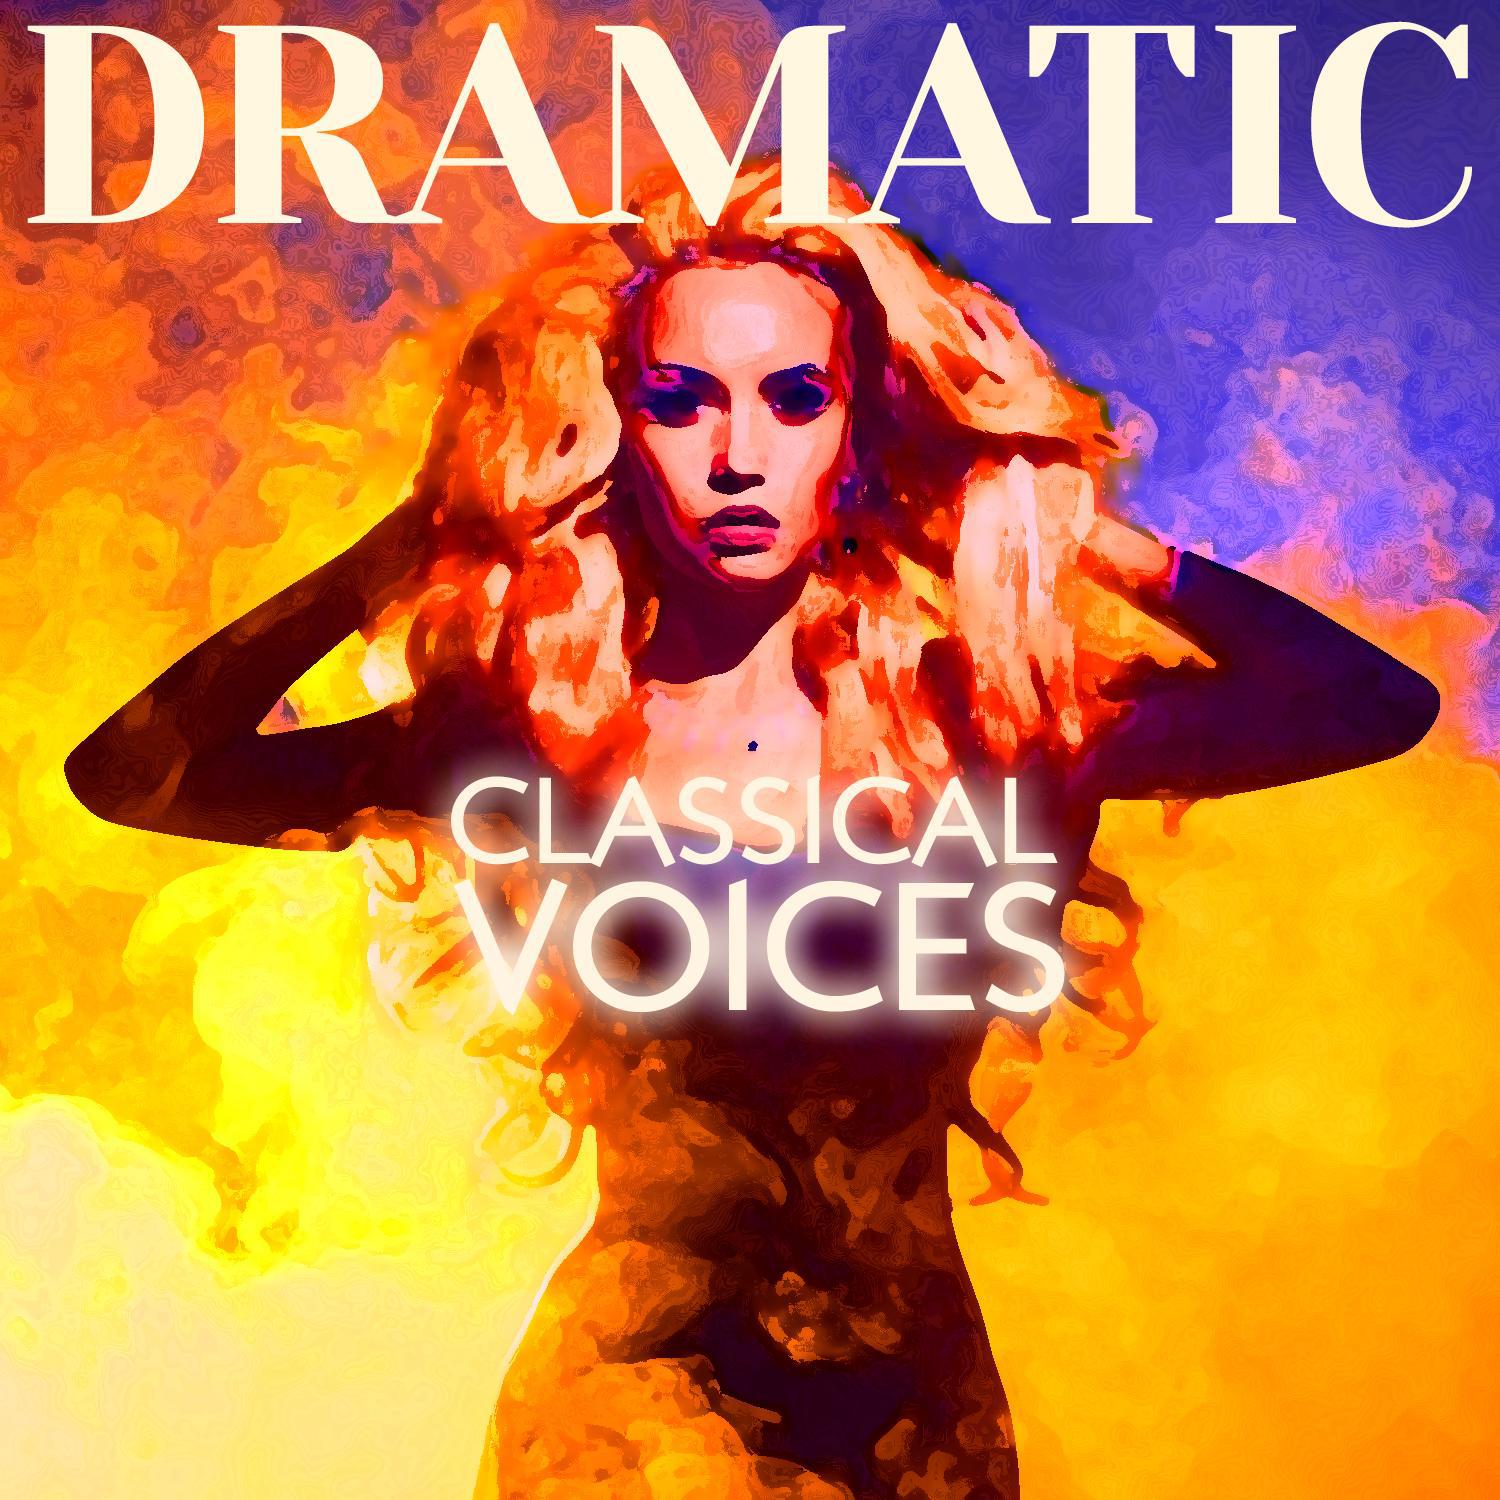 Dramatic Classical Voices